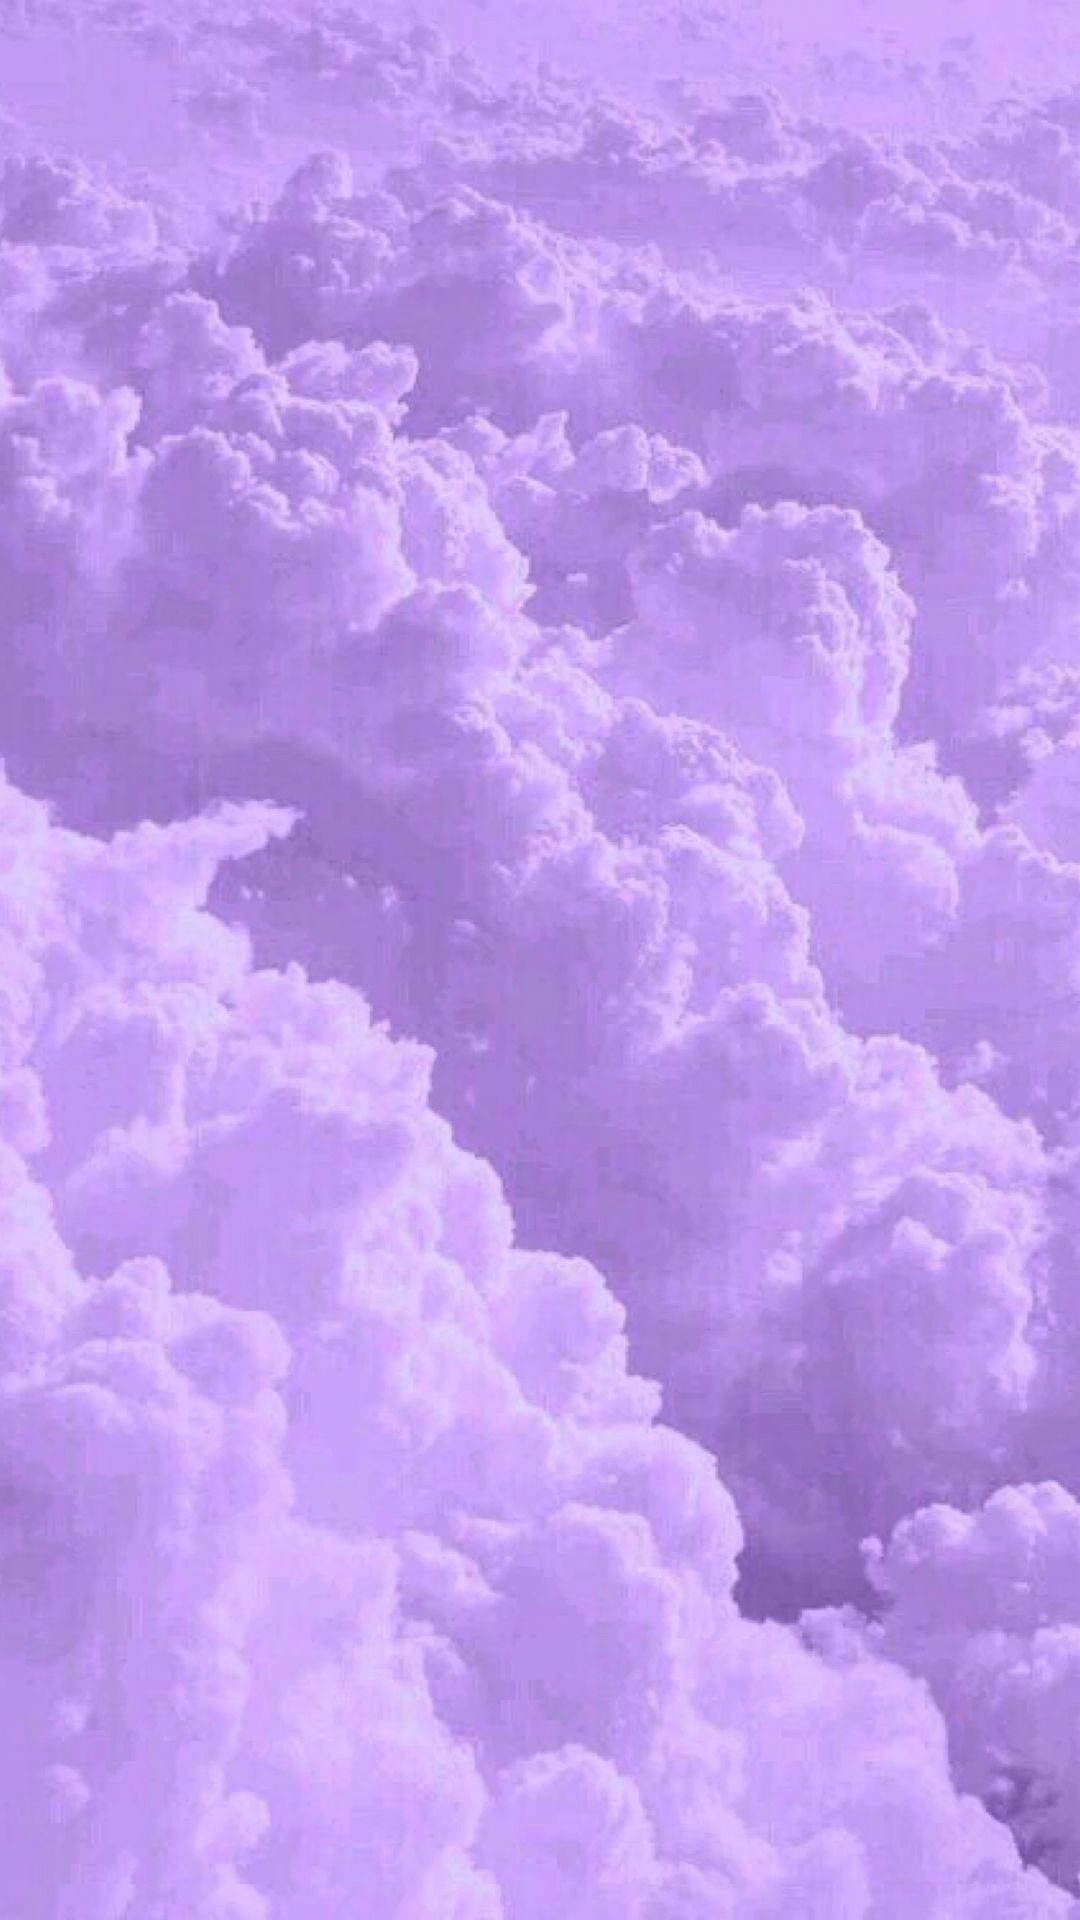 IPhone wallpaper with high-resolution 1080x1920 pixel. You can use this wallpaper for your iPhone 5, 6, 7, 8, X, XS, XR backgrounds, Mobile Screensaver, or iPad Lock Screen - Lavender, purple, light purple, light yellow, violet, cute purple, pastel purple